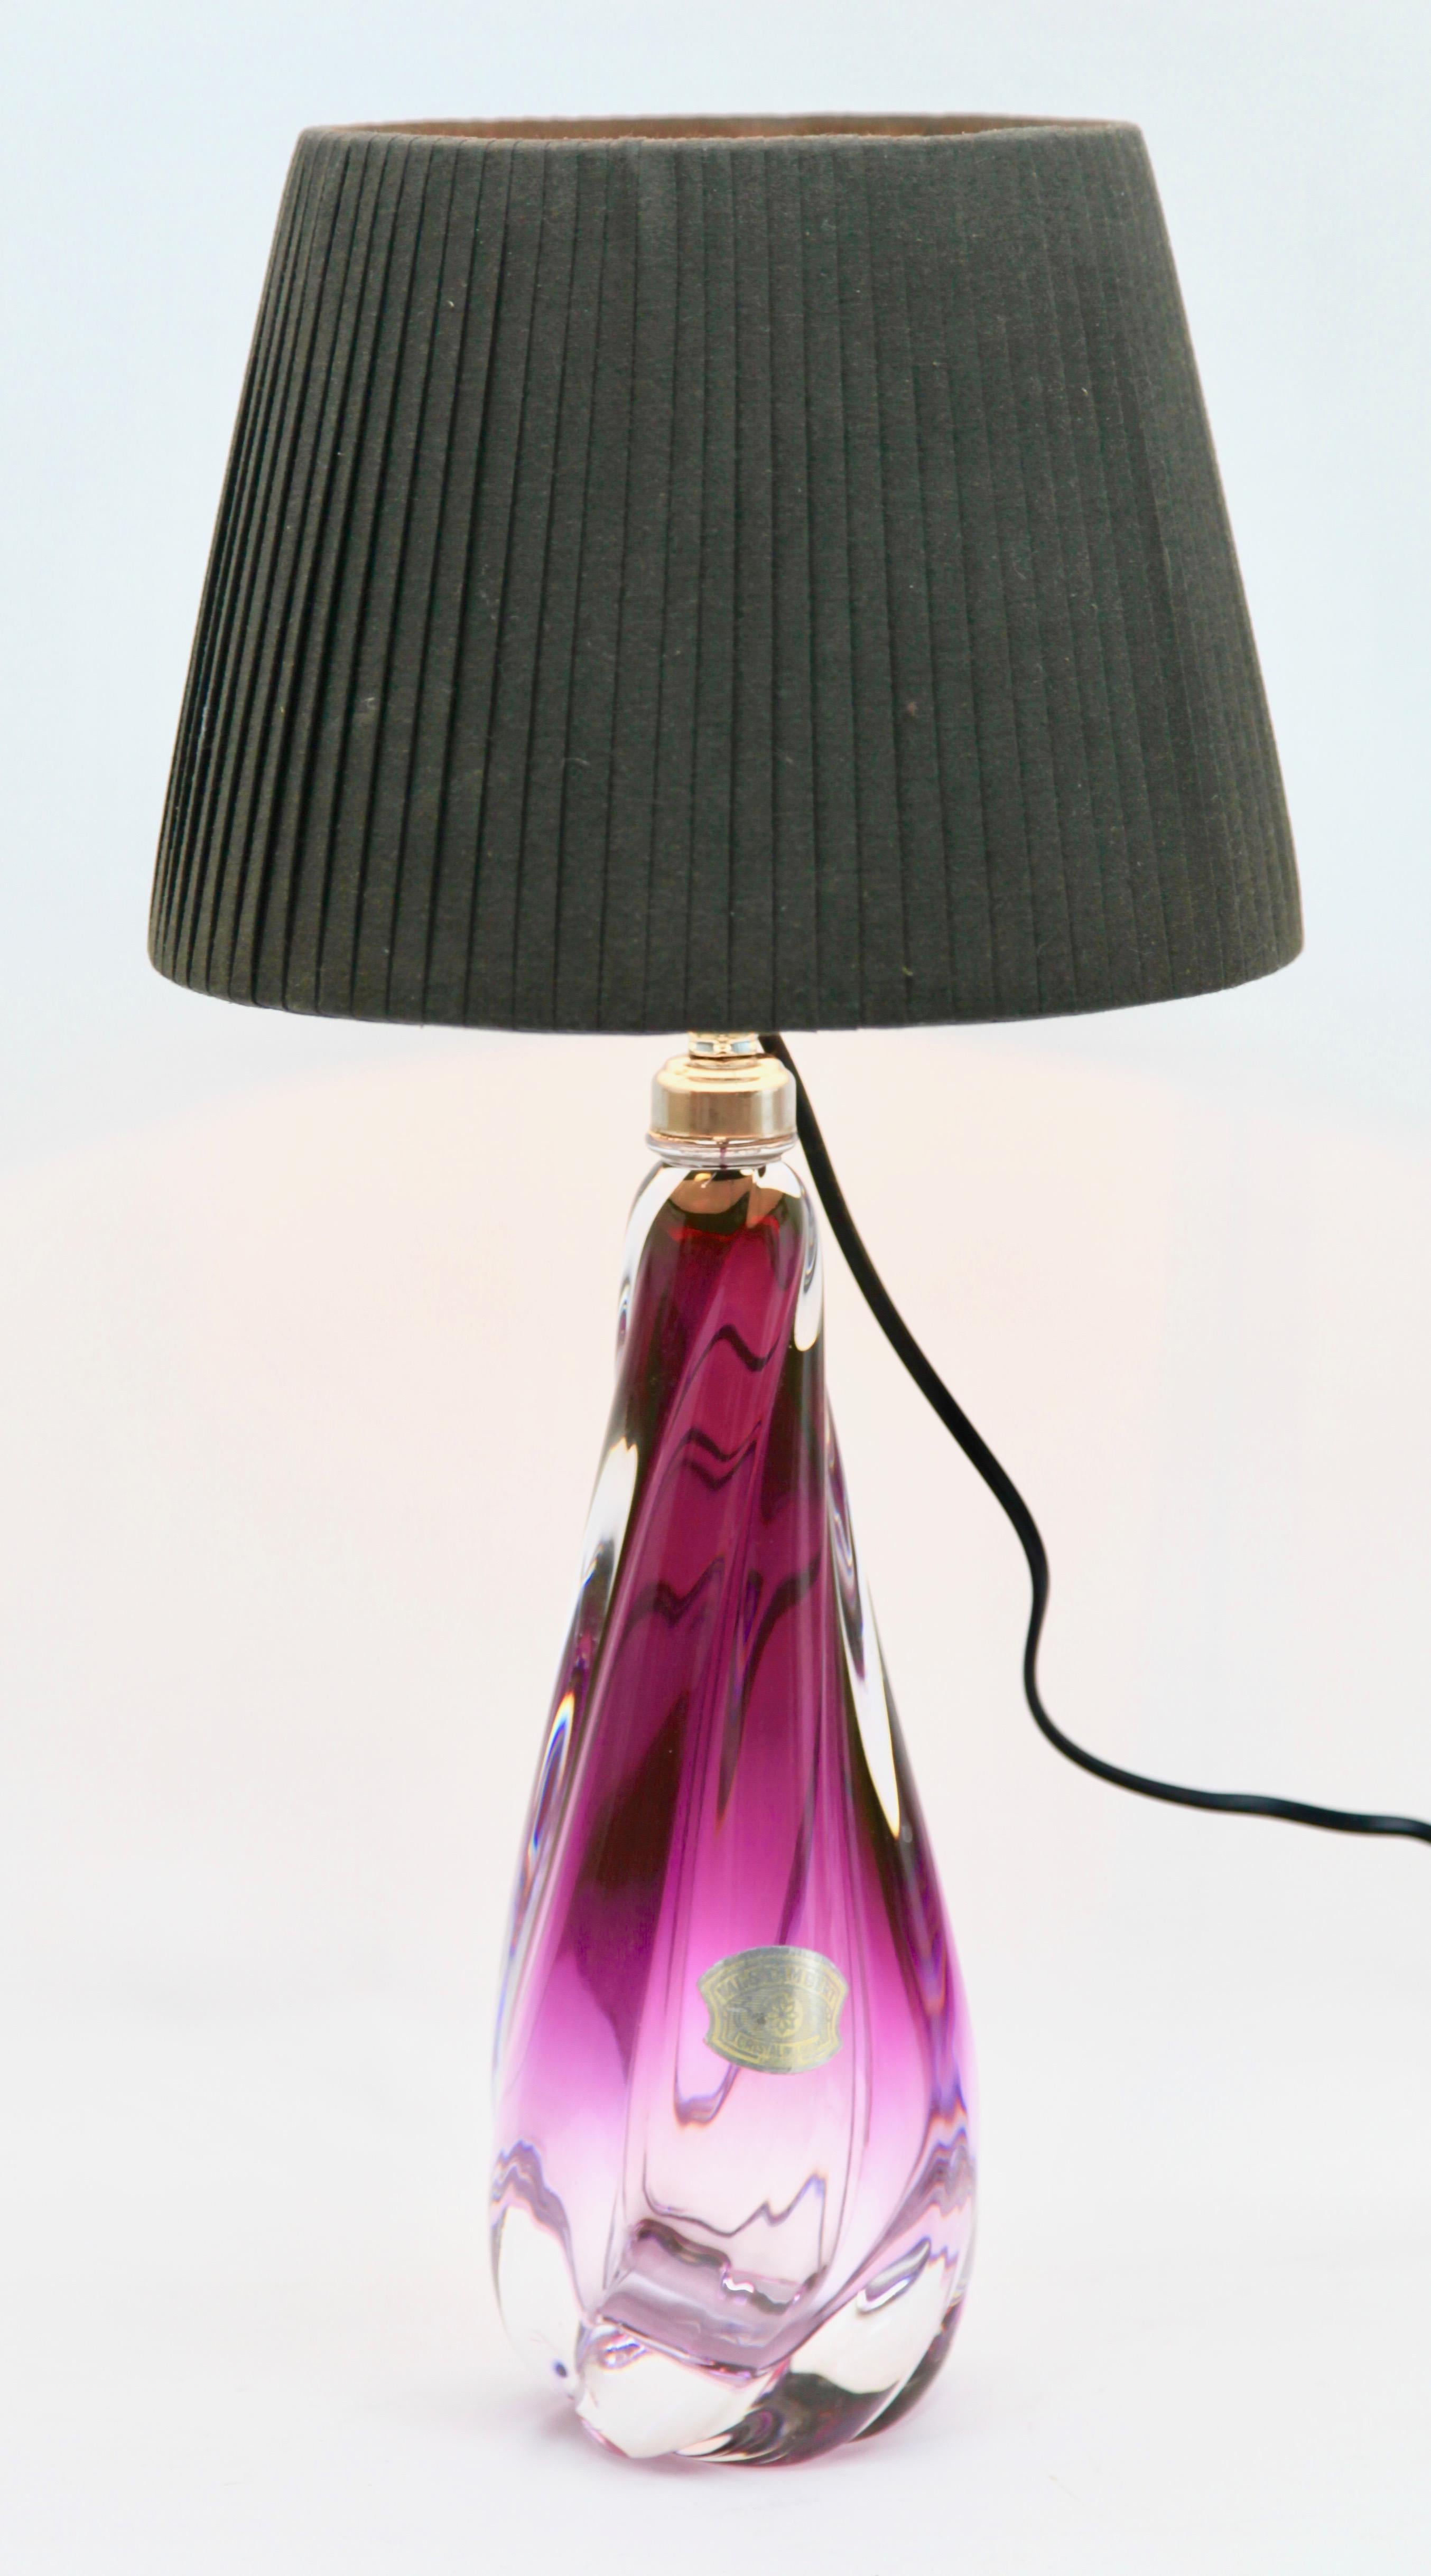 Val Saint Lambert signed Val Saint Lambert 'Twisted Light' crystal glass table lamp, 1953.

This simple yet graceful table lamp size, 12.2 inches excluding the lamp-fitting and shade.
The colored core in Classic Val Saint Lambert tint, has been